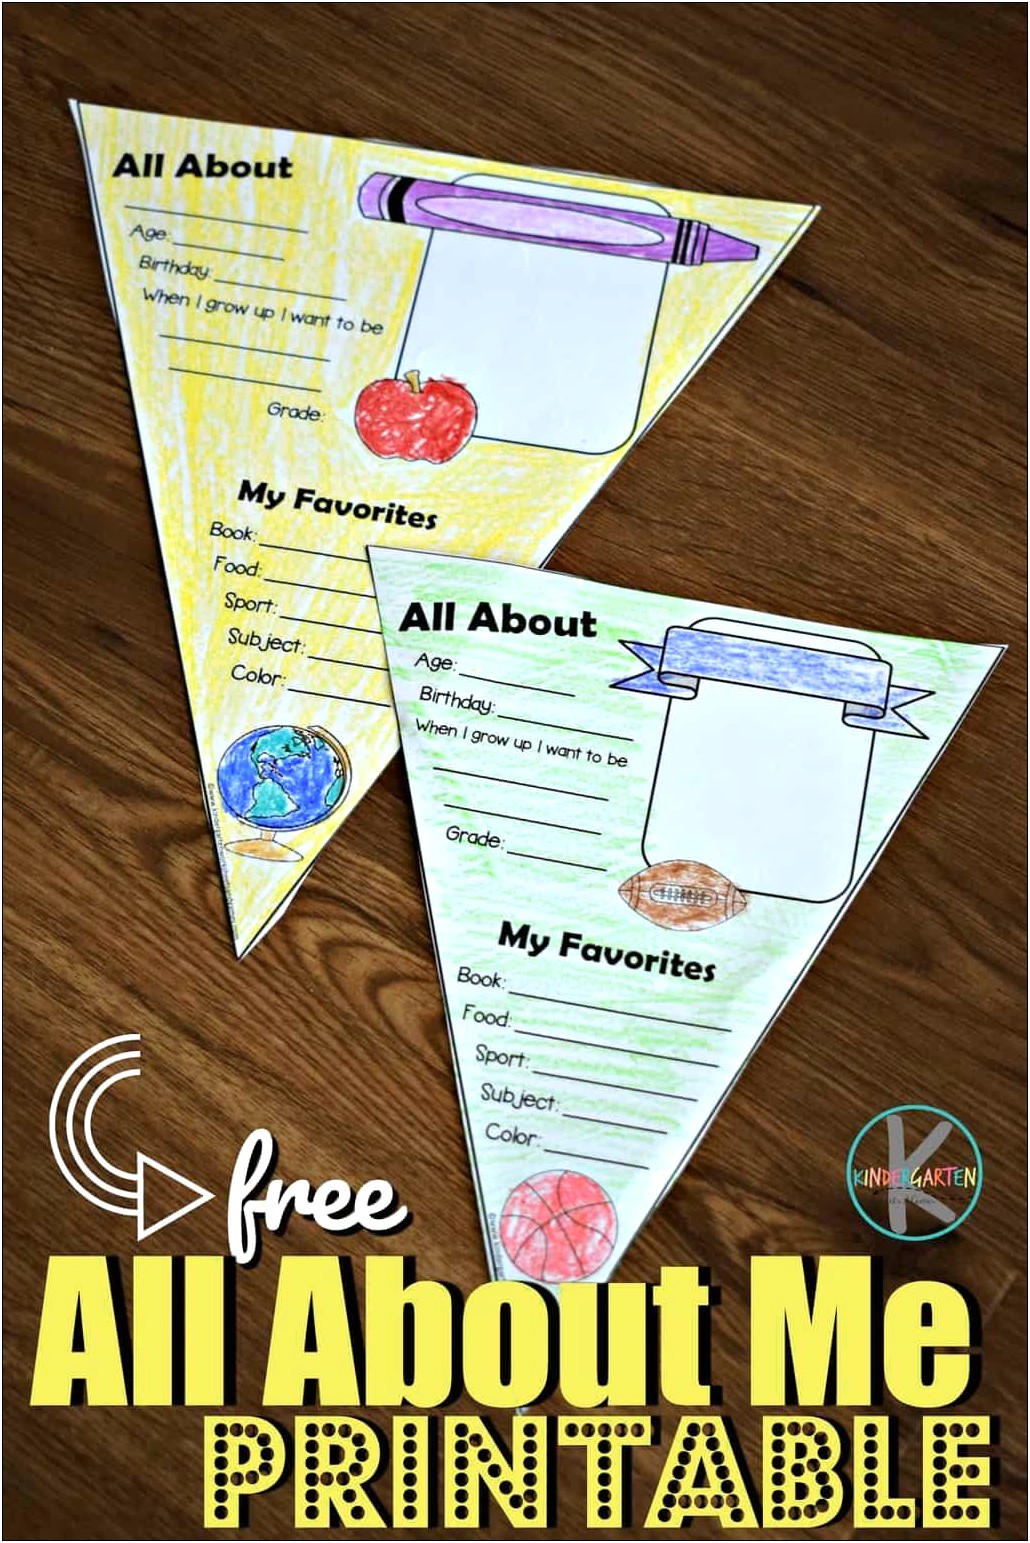 all-about-me-free-preschool-template-templates-resume-designs-bnv48ydvkw